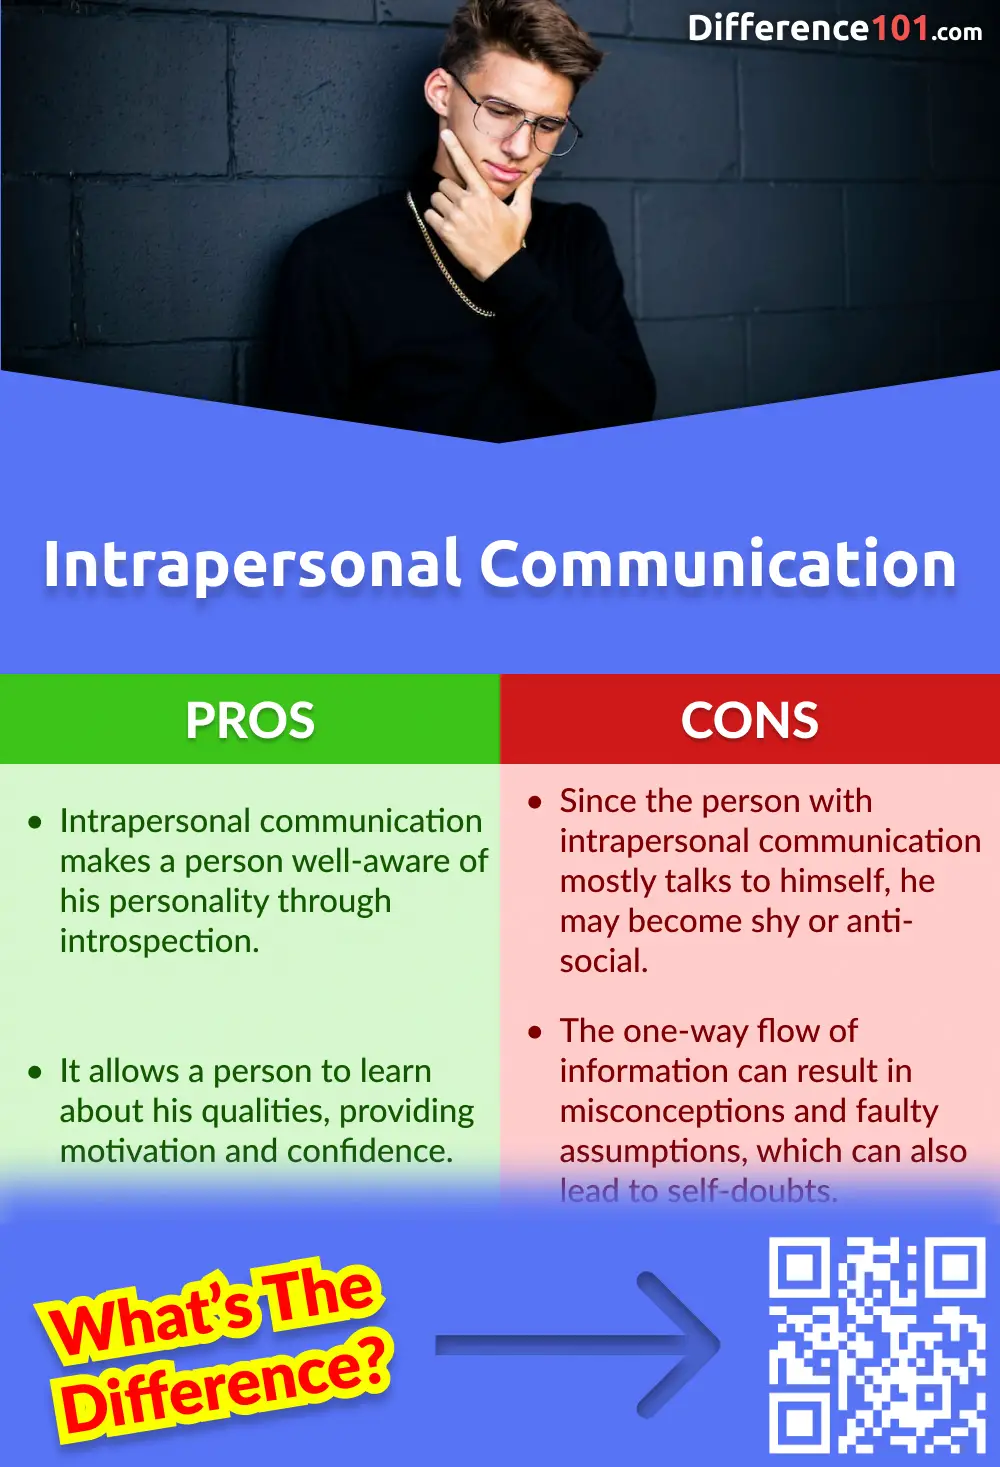 Intrapersonal Communication Pros and Cons